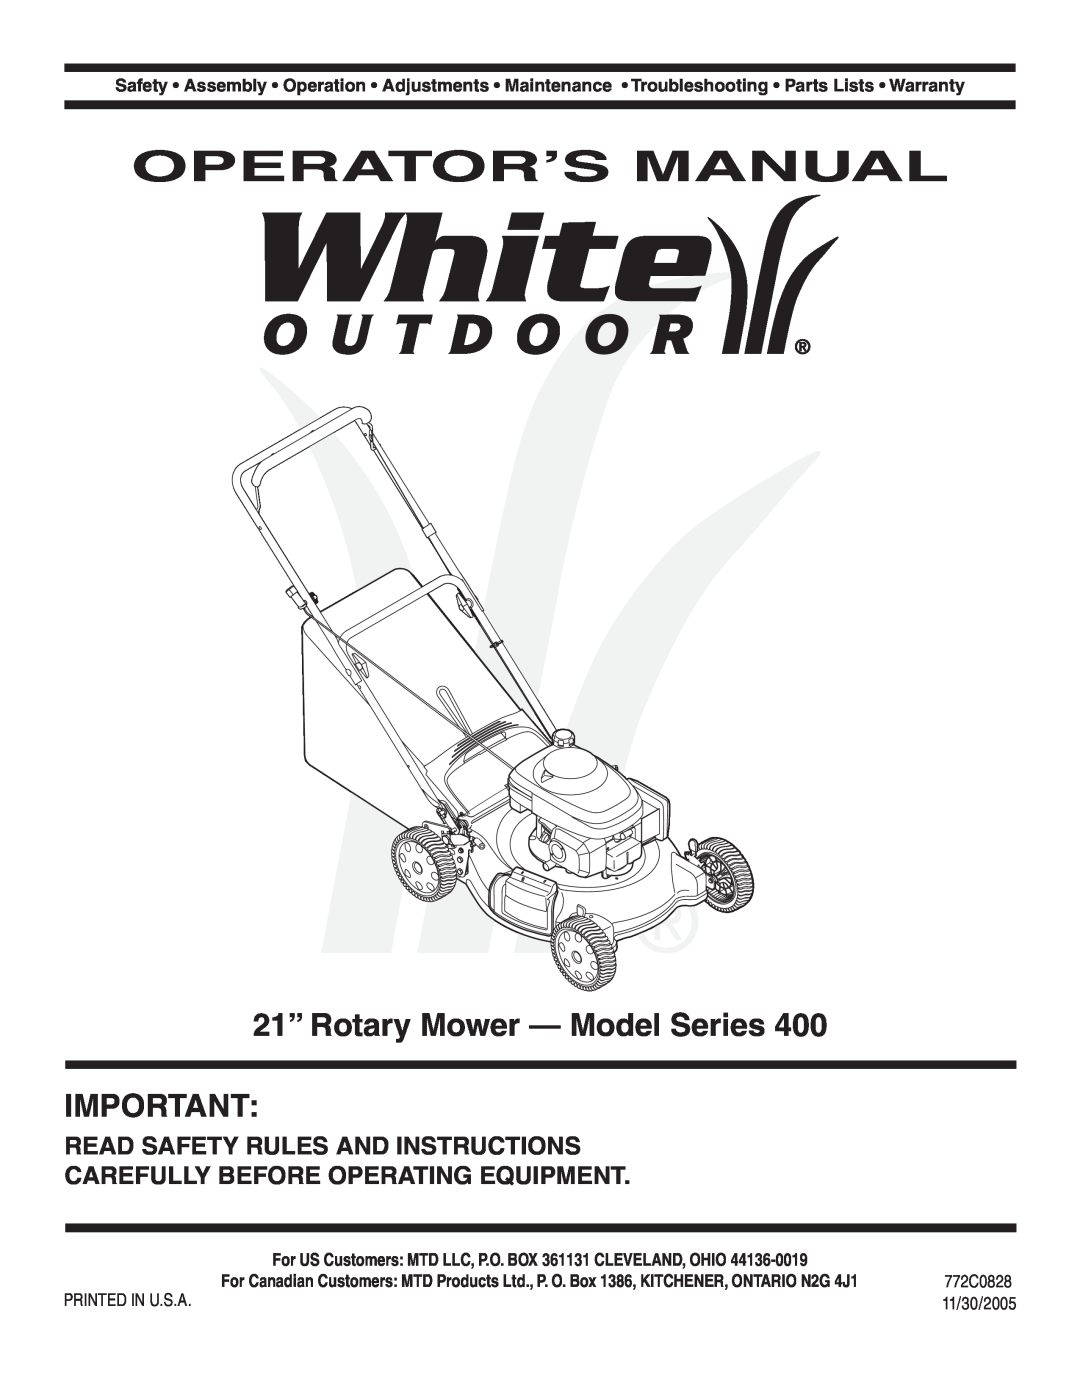 MTD Series 400 warranty Operator’S Manual, 21” Rotary Mower - Model Series, Read Safety Rules And Instructions, 772C0828 